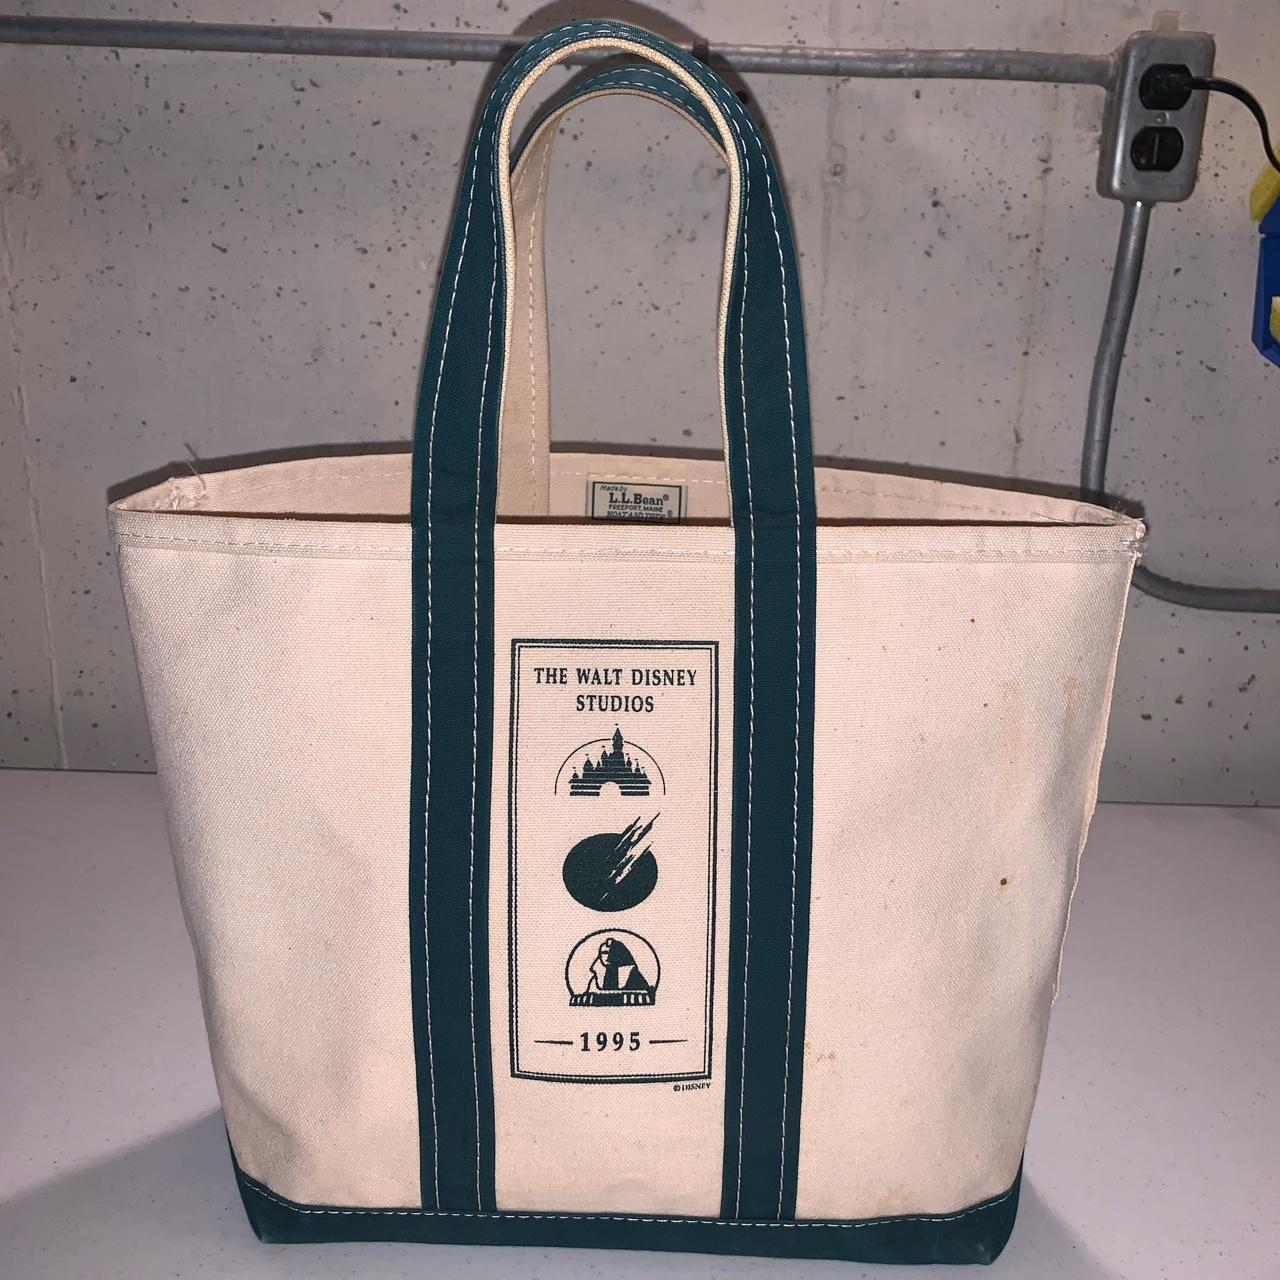 LL Bean Medium Boat and Tote Bag White & Light Blue Made in the USA-stained